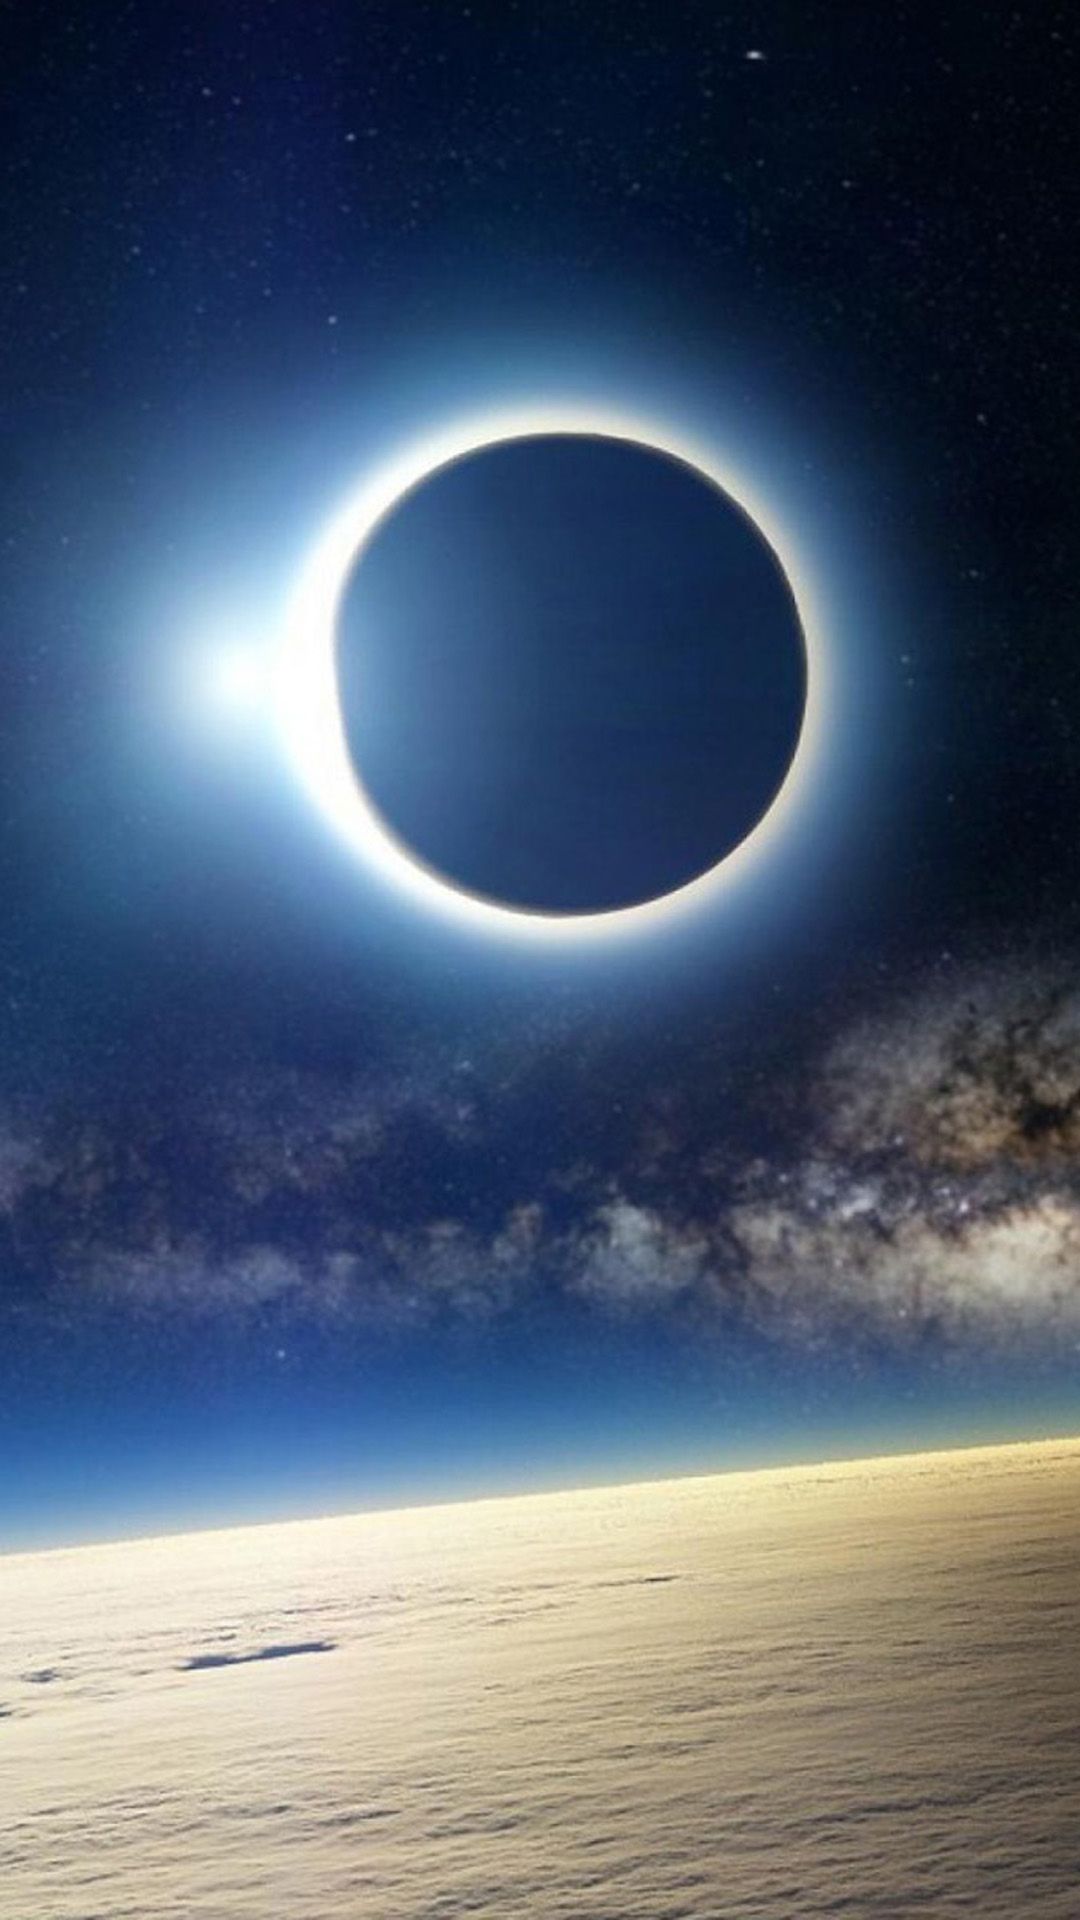 Eclipse Iphone Wallpapers